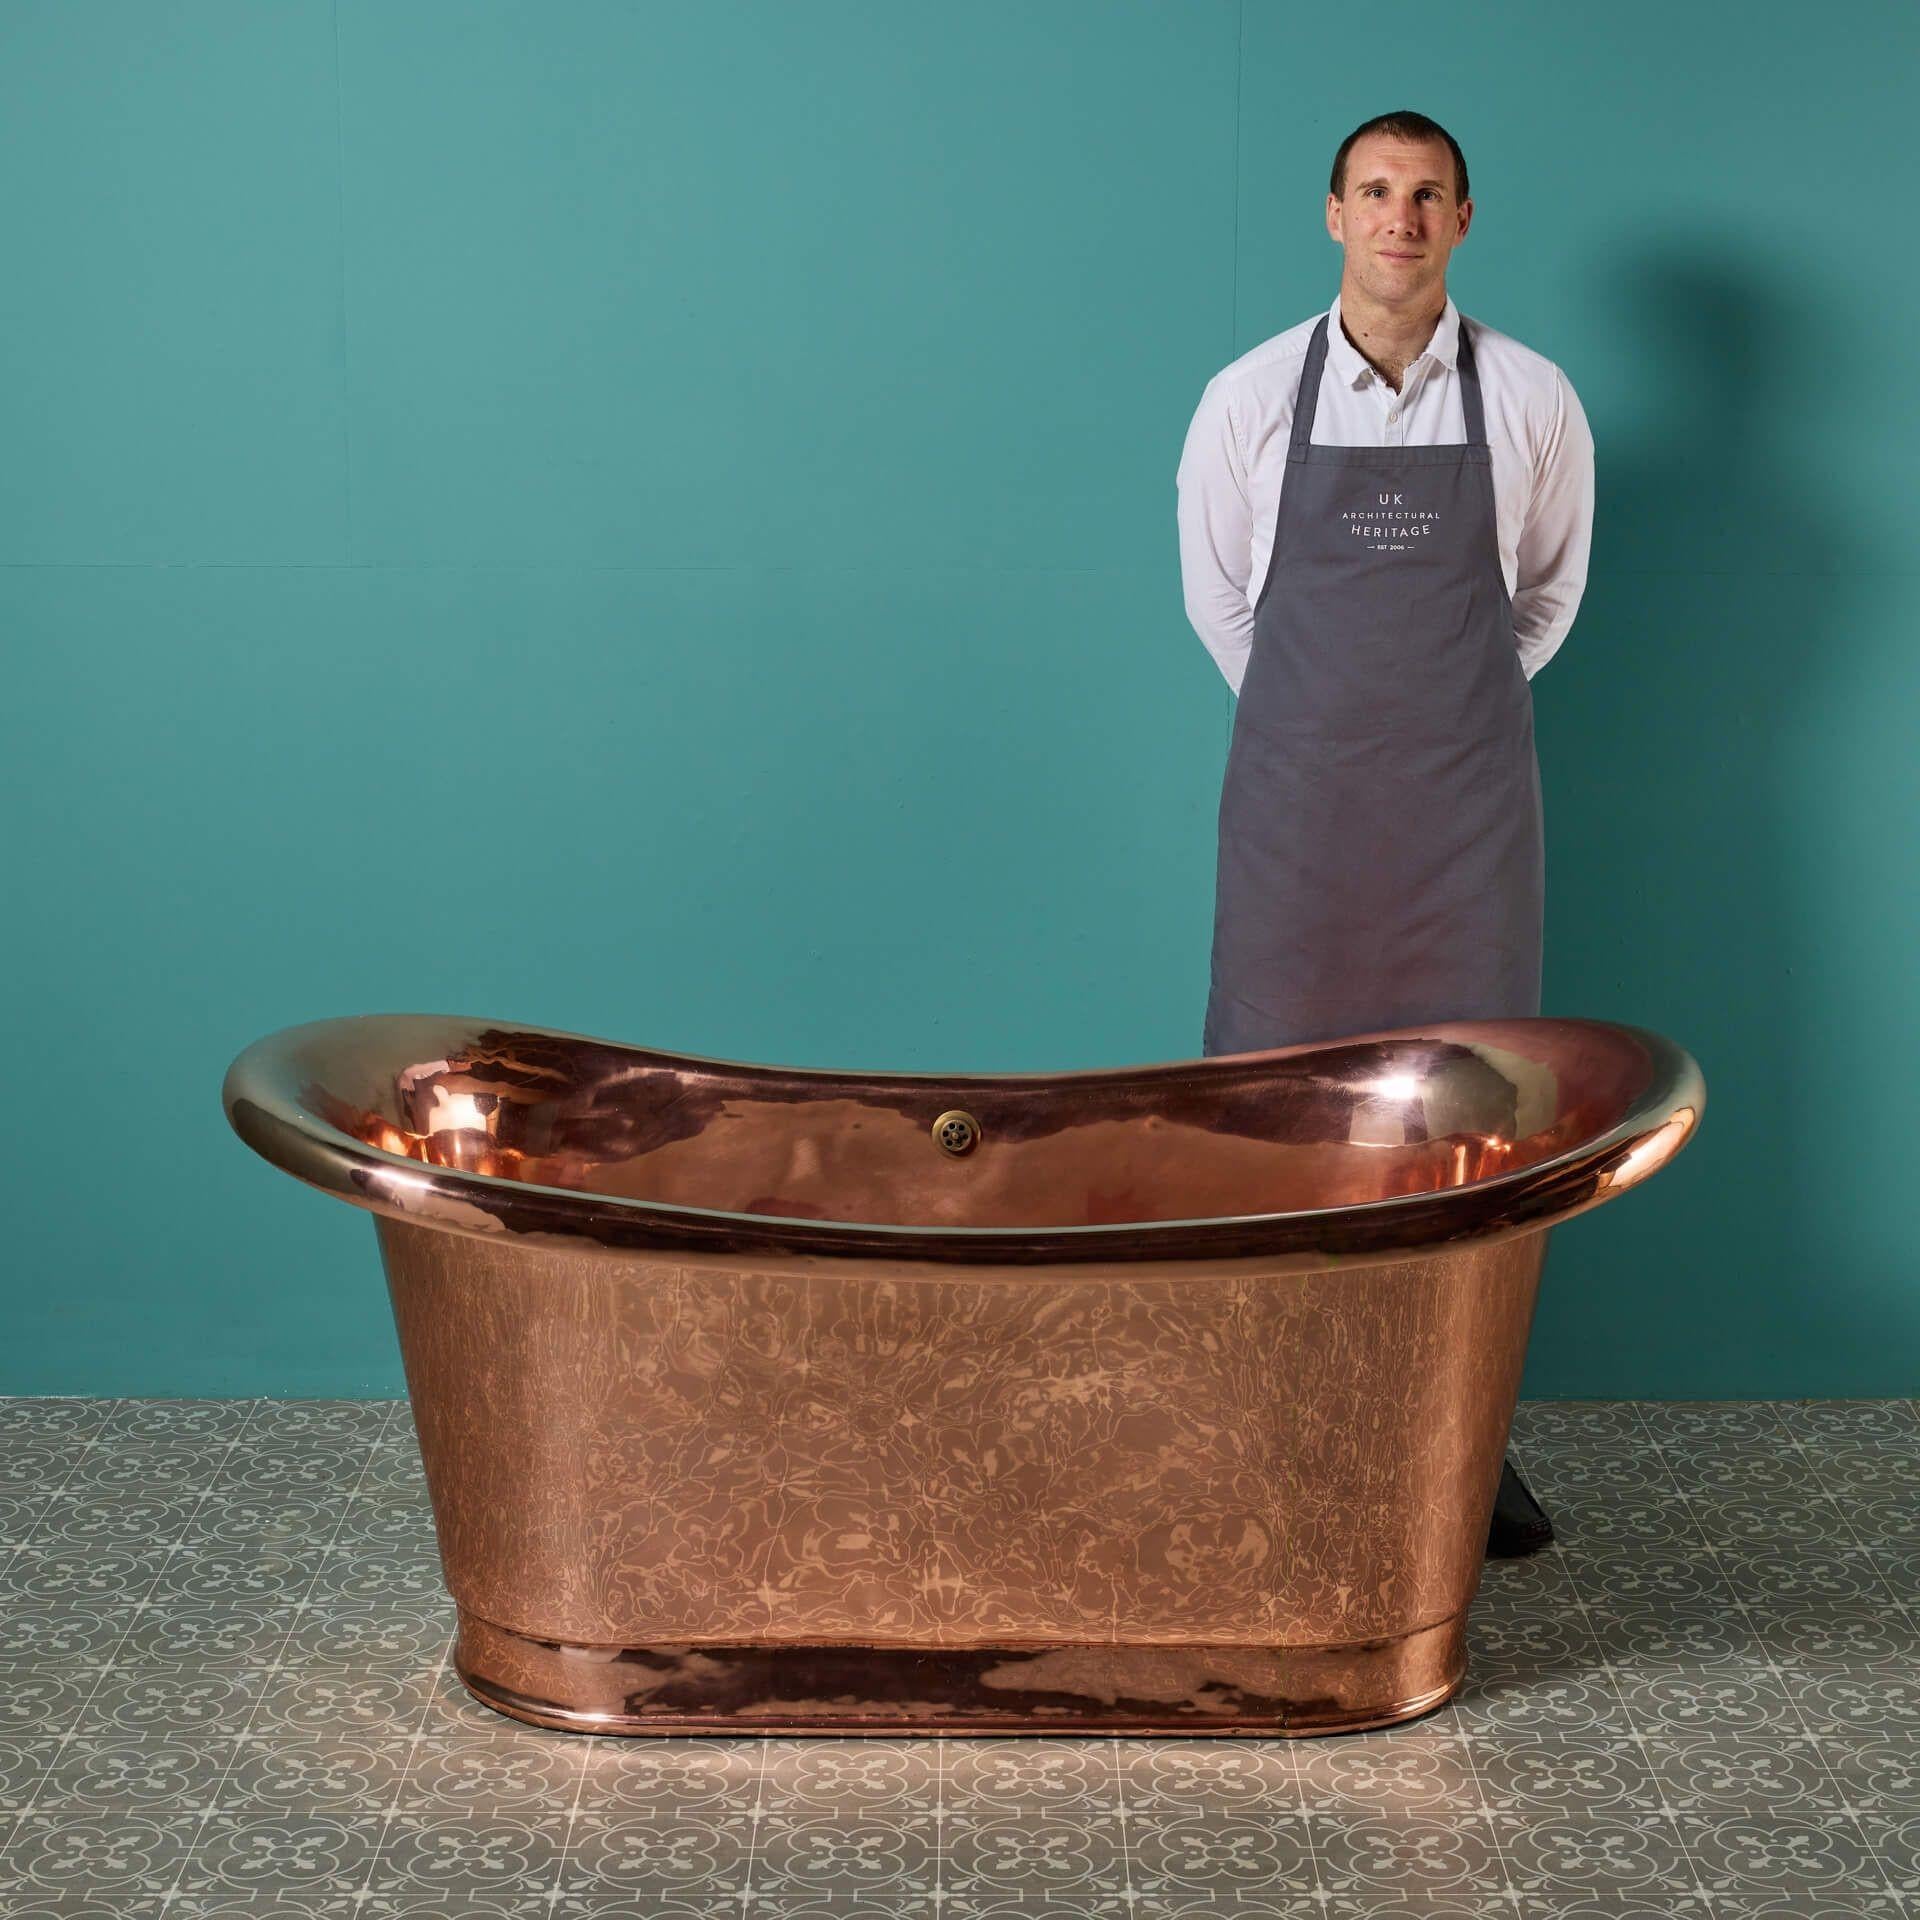 An antique Bateau copper double-ended roll top bath, was restored and fitted to a English country house, but had been in storage for the last 15 years.
Incorporating Victorian and Louis style, the rose copper has an extremely high polished finish